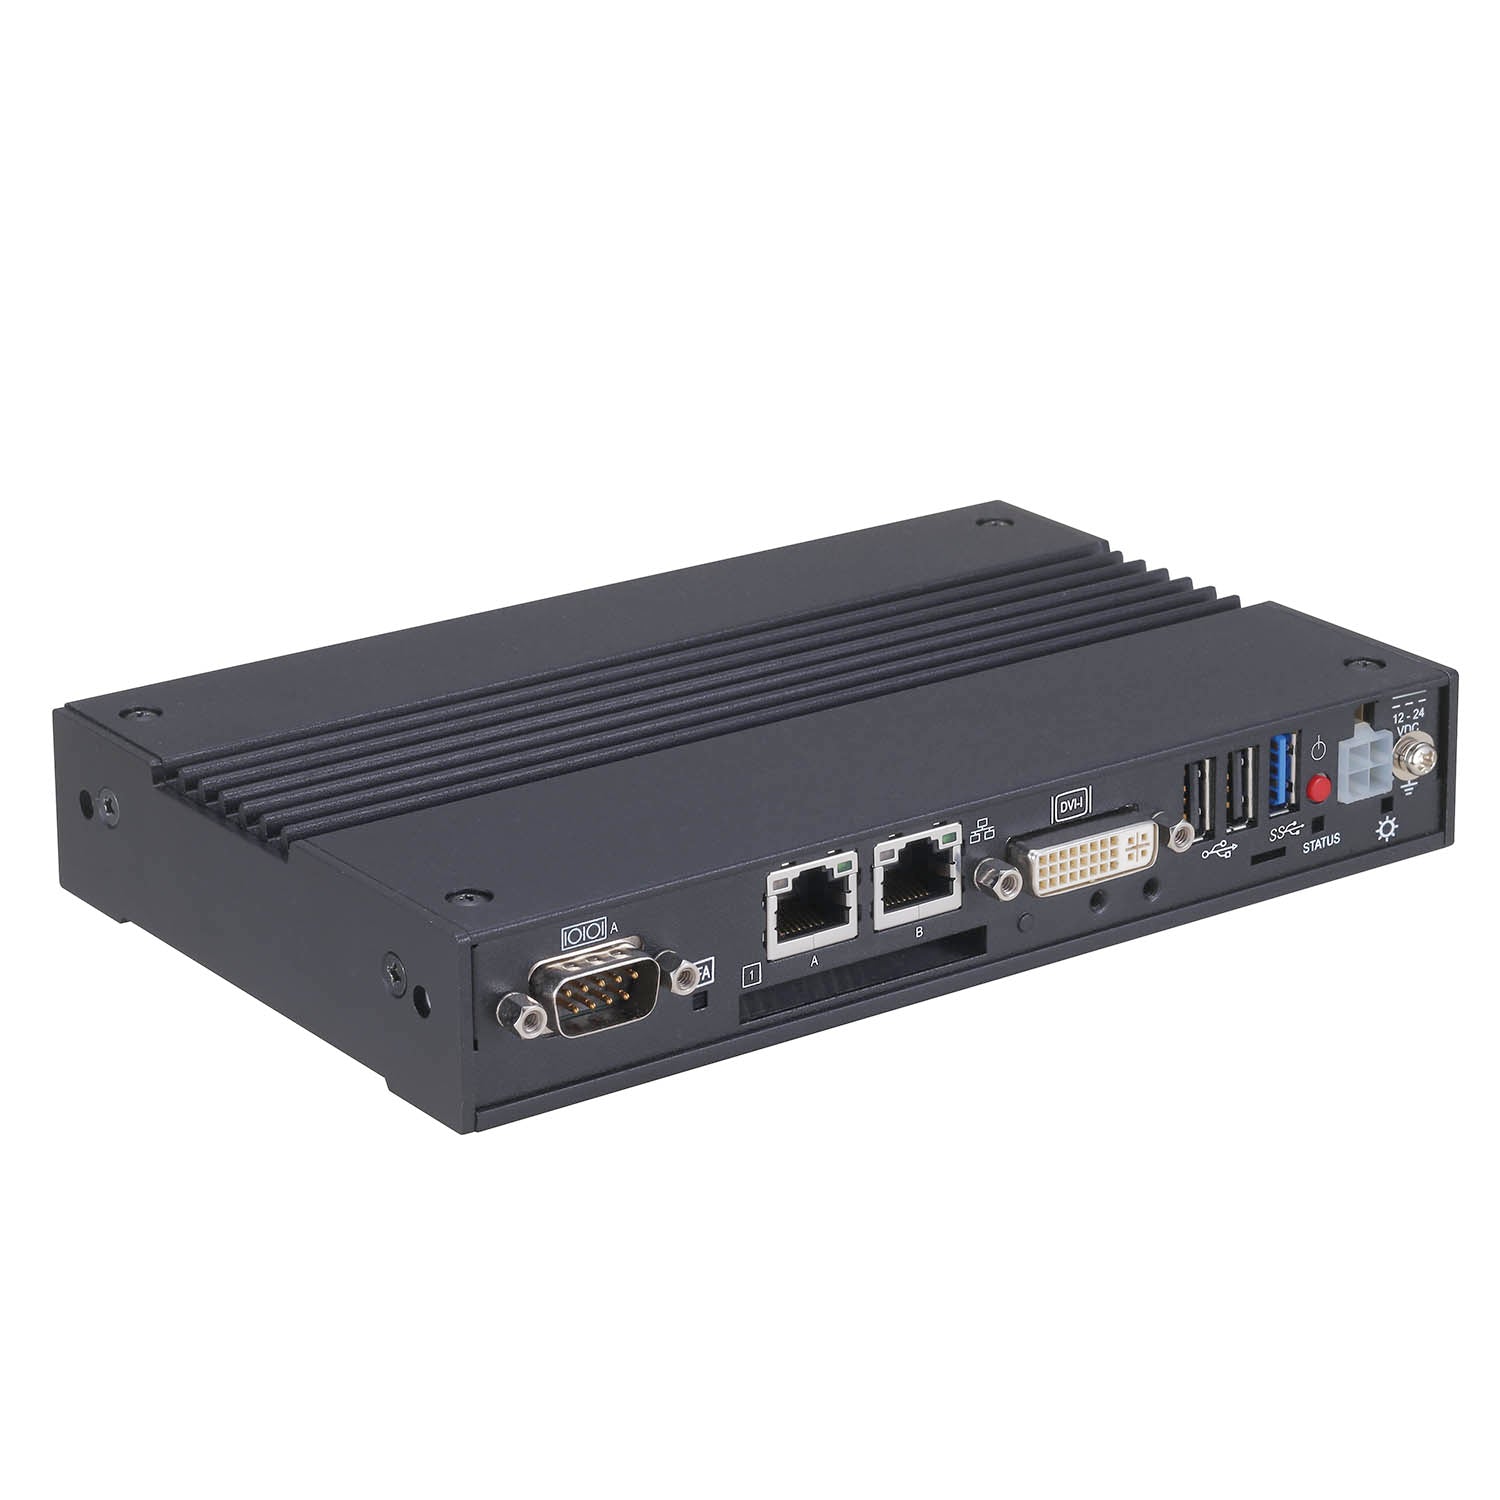 BX-220 Fanless Embedded PC / Thin Client / Intel Atom E3845 (Bay Trail) / 12-24VDC Input / 0-60C Operation